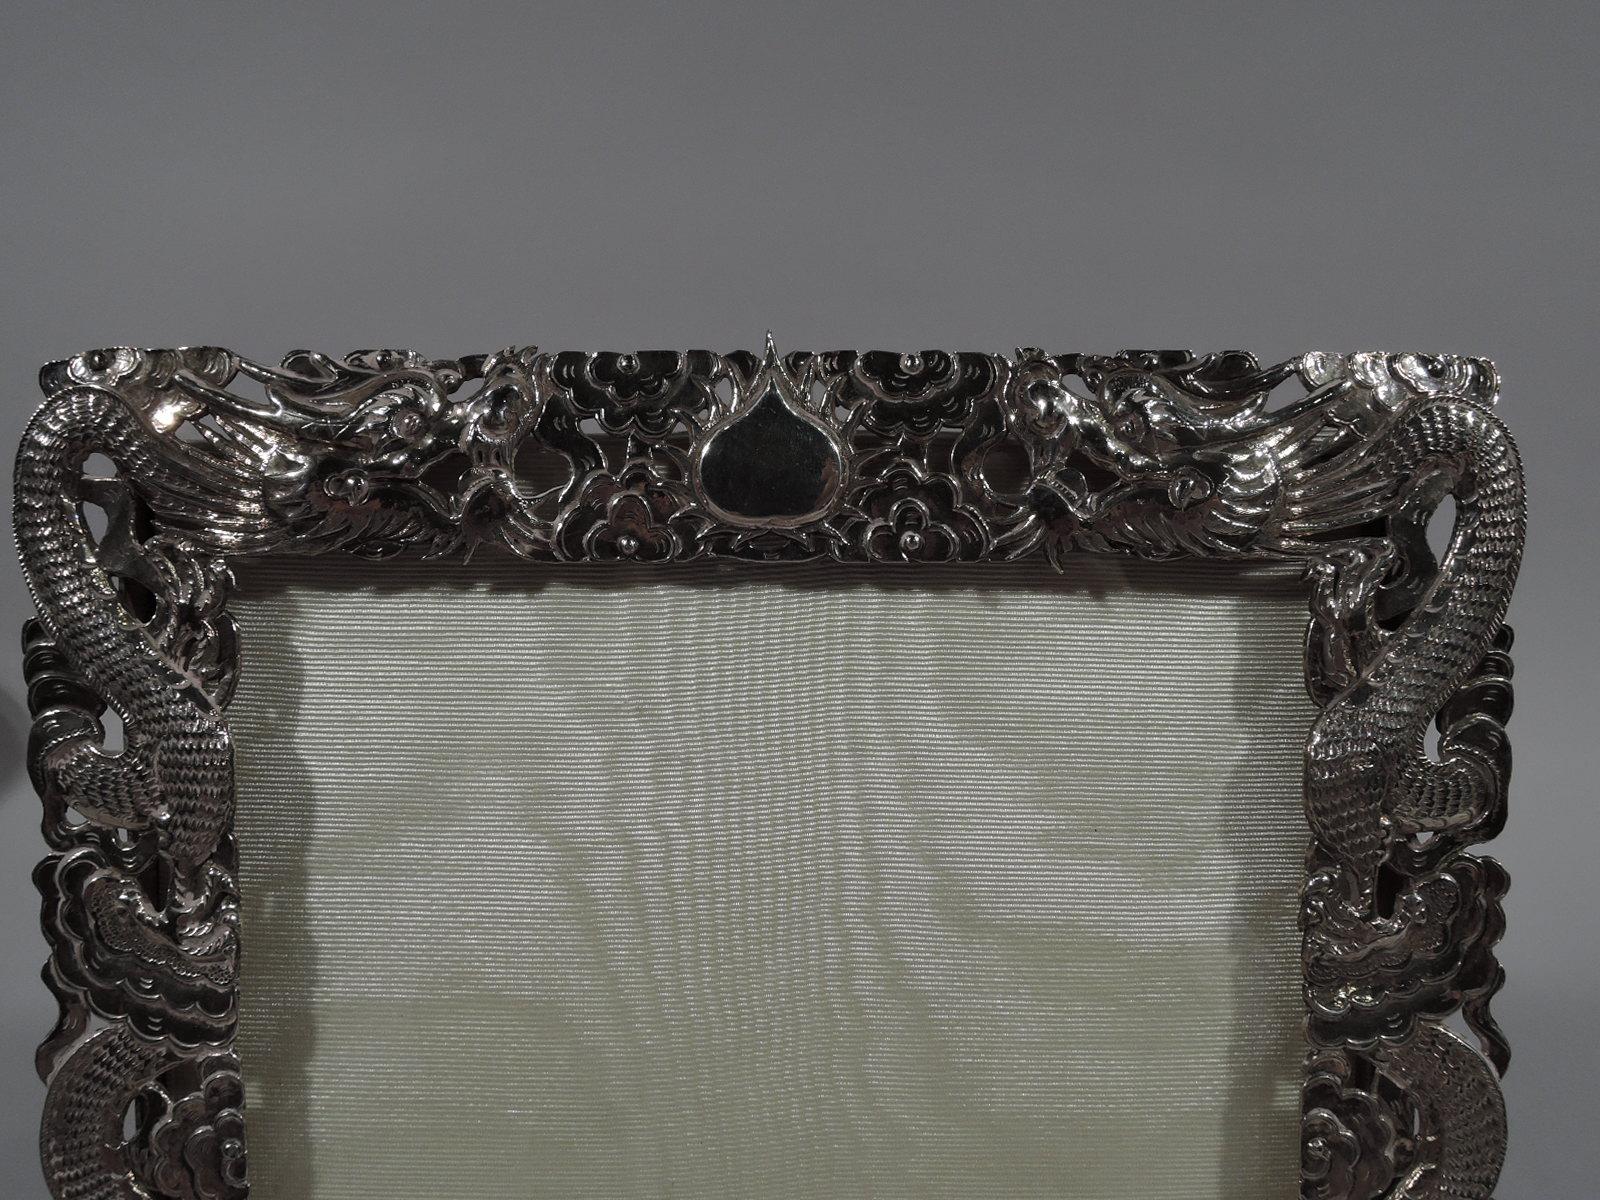 Chinese export silver picture frame, circa 1910. Rectangular window in pierced surround made up of serpentine serpent-dragons slithering through clouds. At top mono plate (vacant). With glass, silk lining, and bamboo-style wire hinged support.